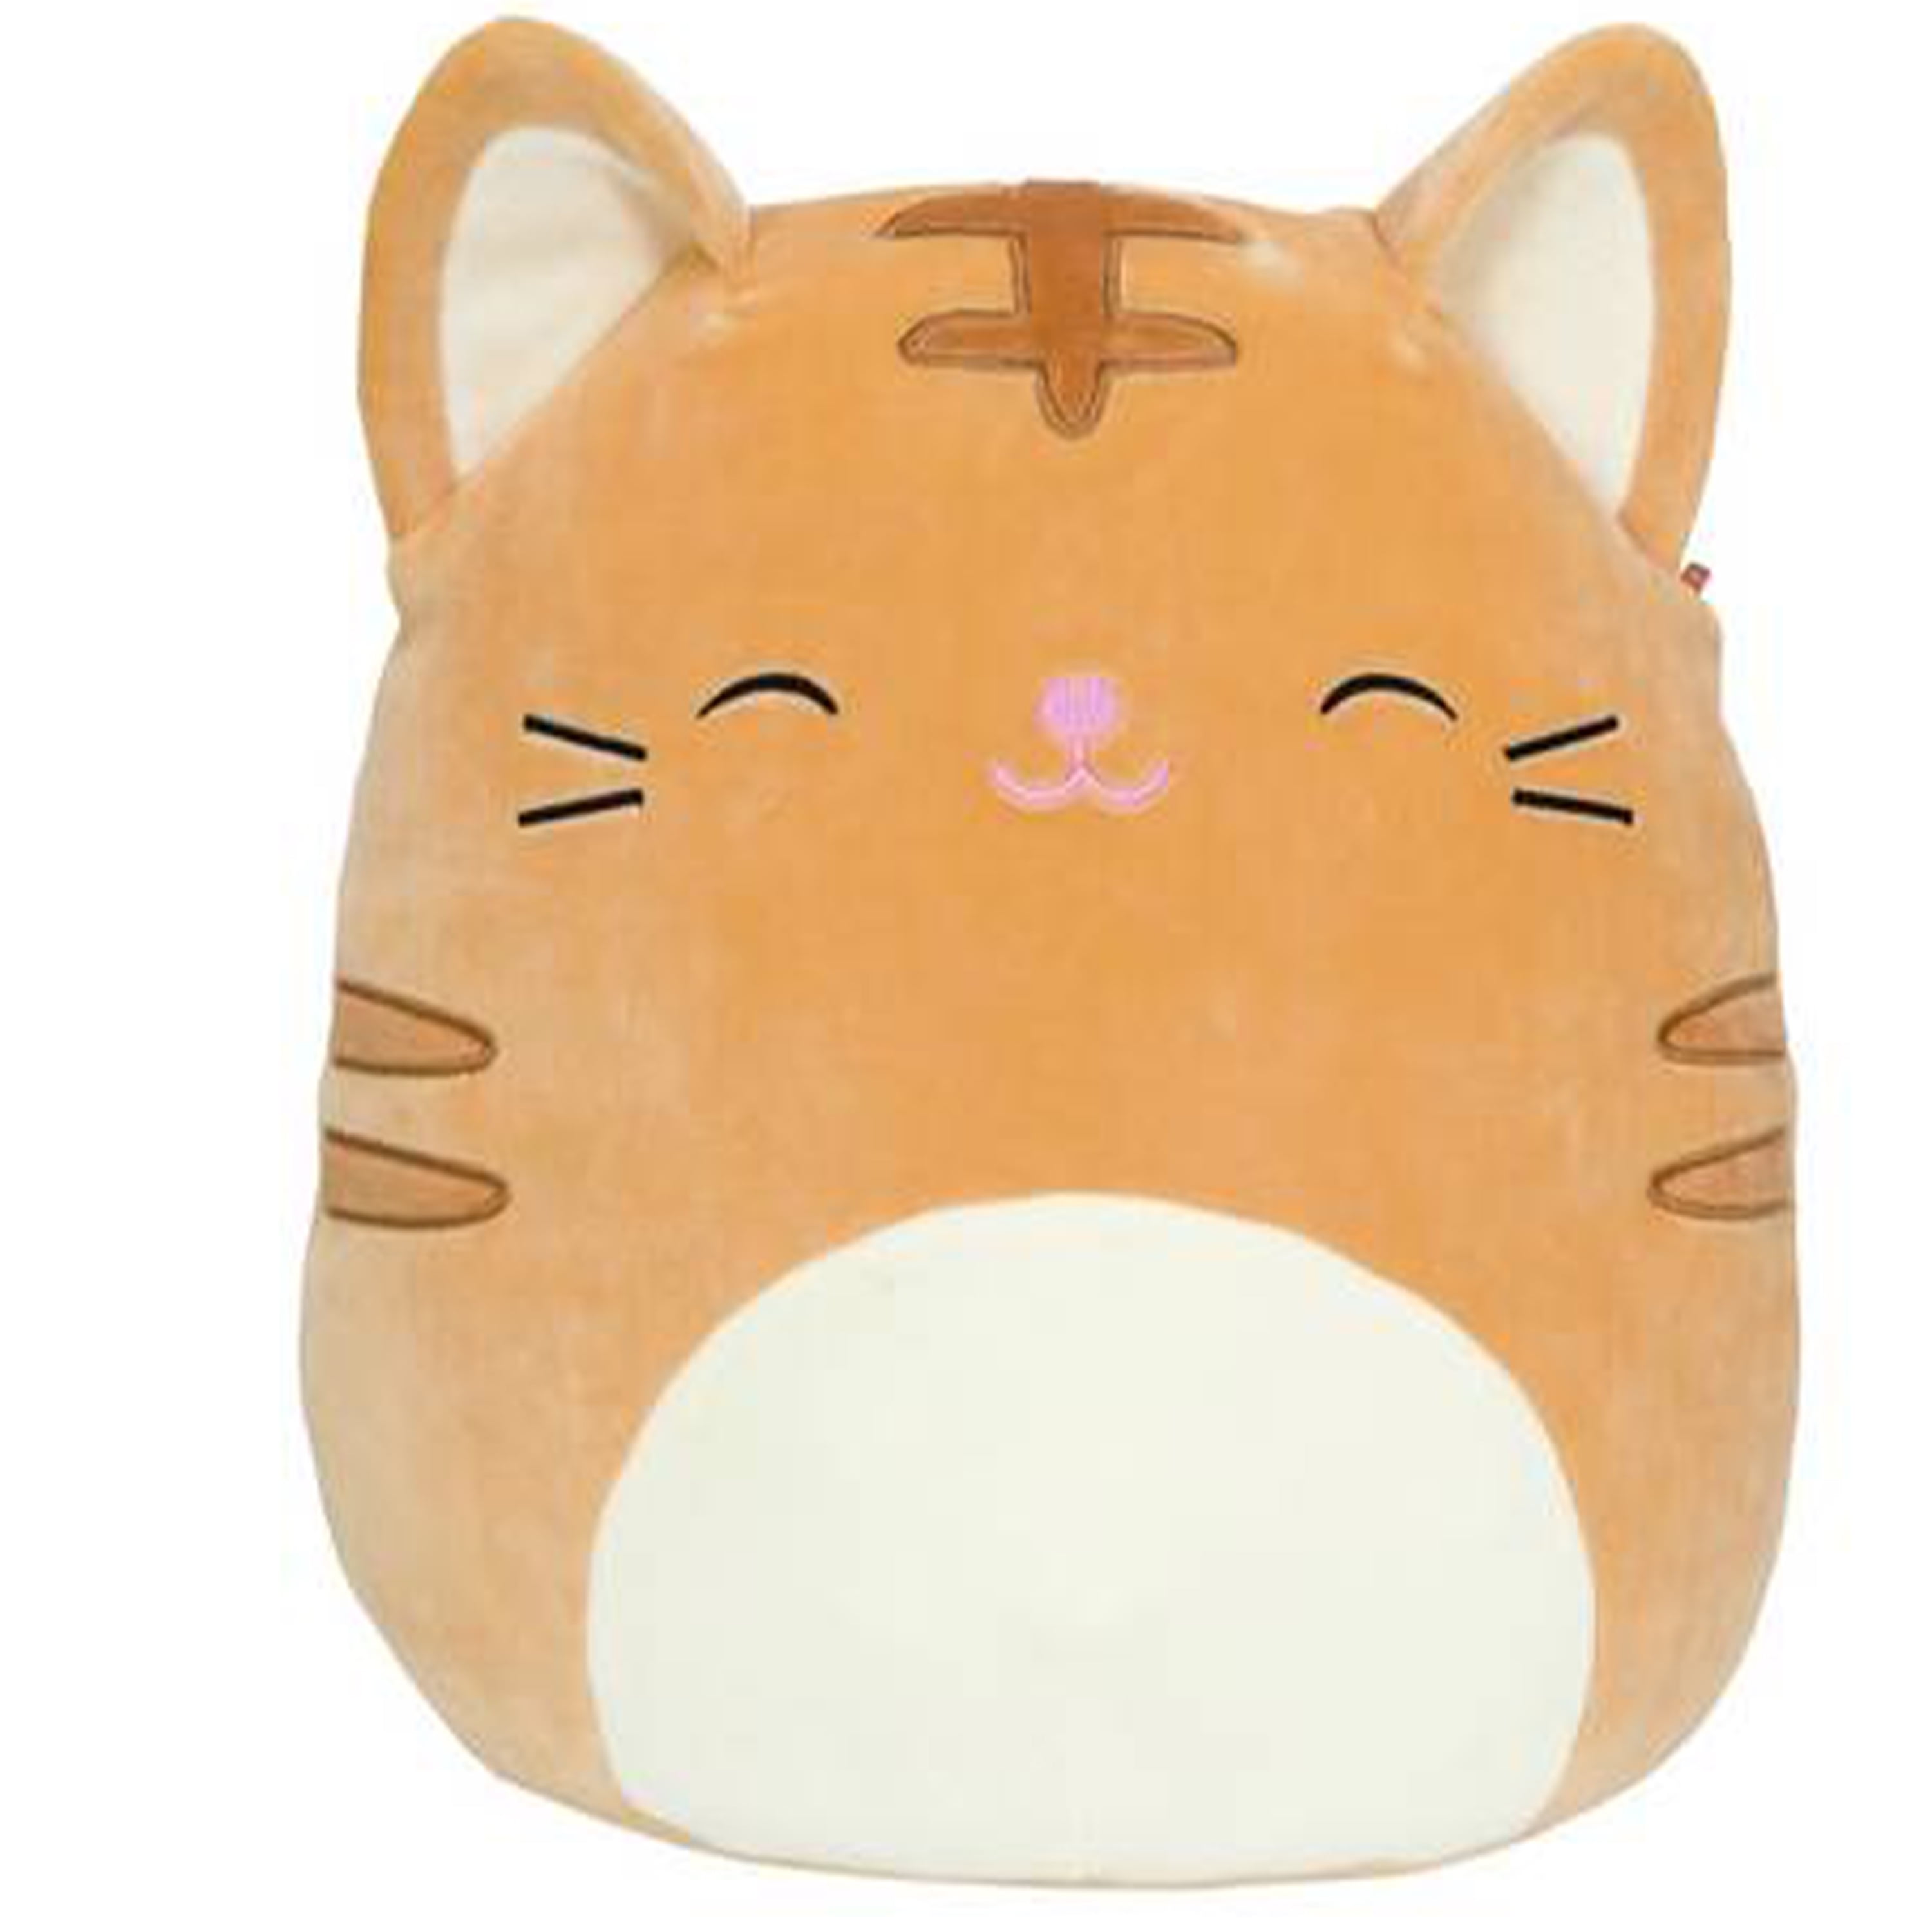 SQUISHMALLOW KELLYTOY JUMBO 16" NATHAN THE GOLDEN BROWN TABBY CAT SUPER SOFT NWT